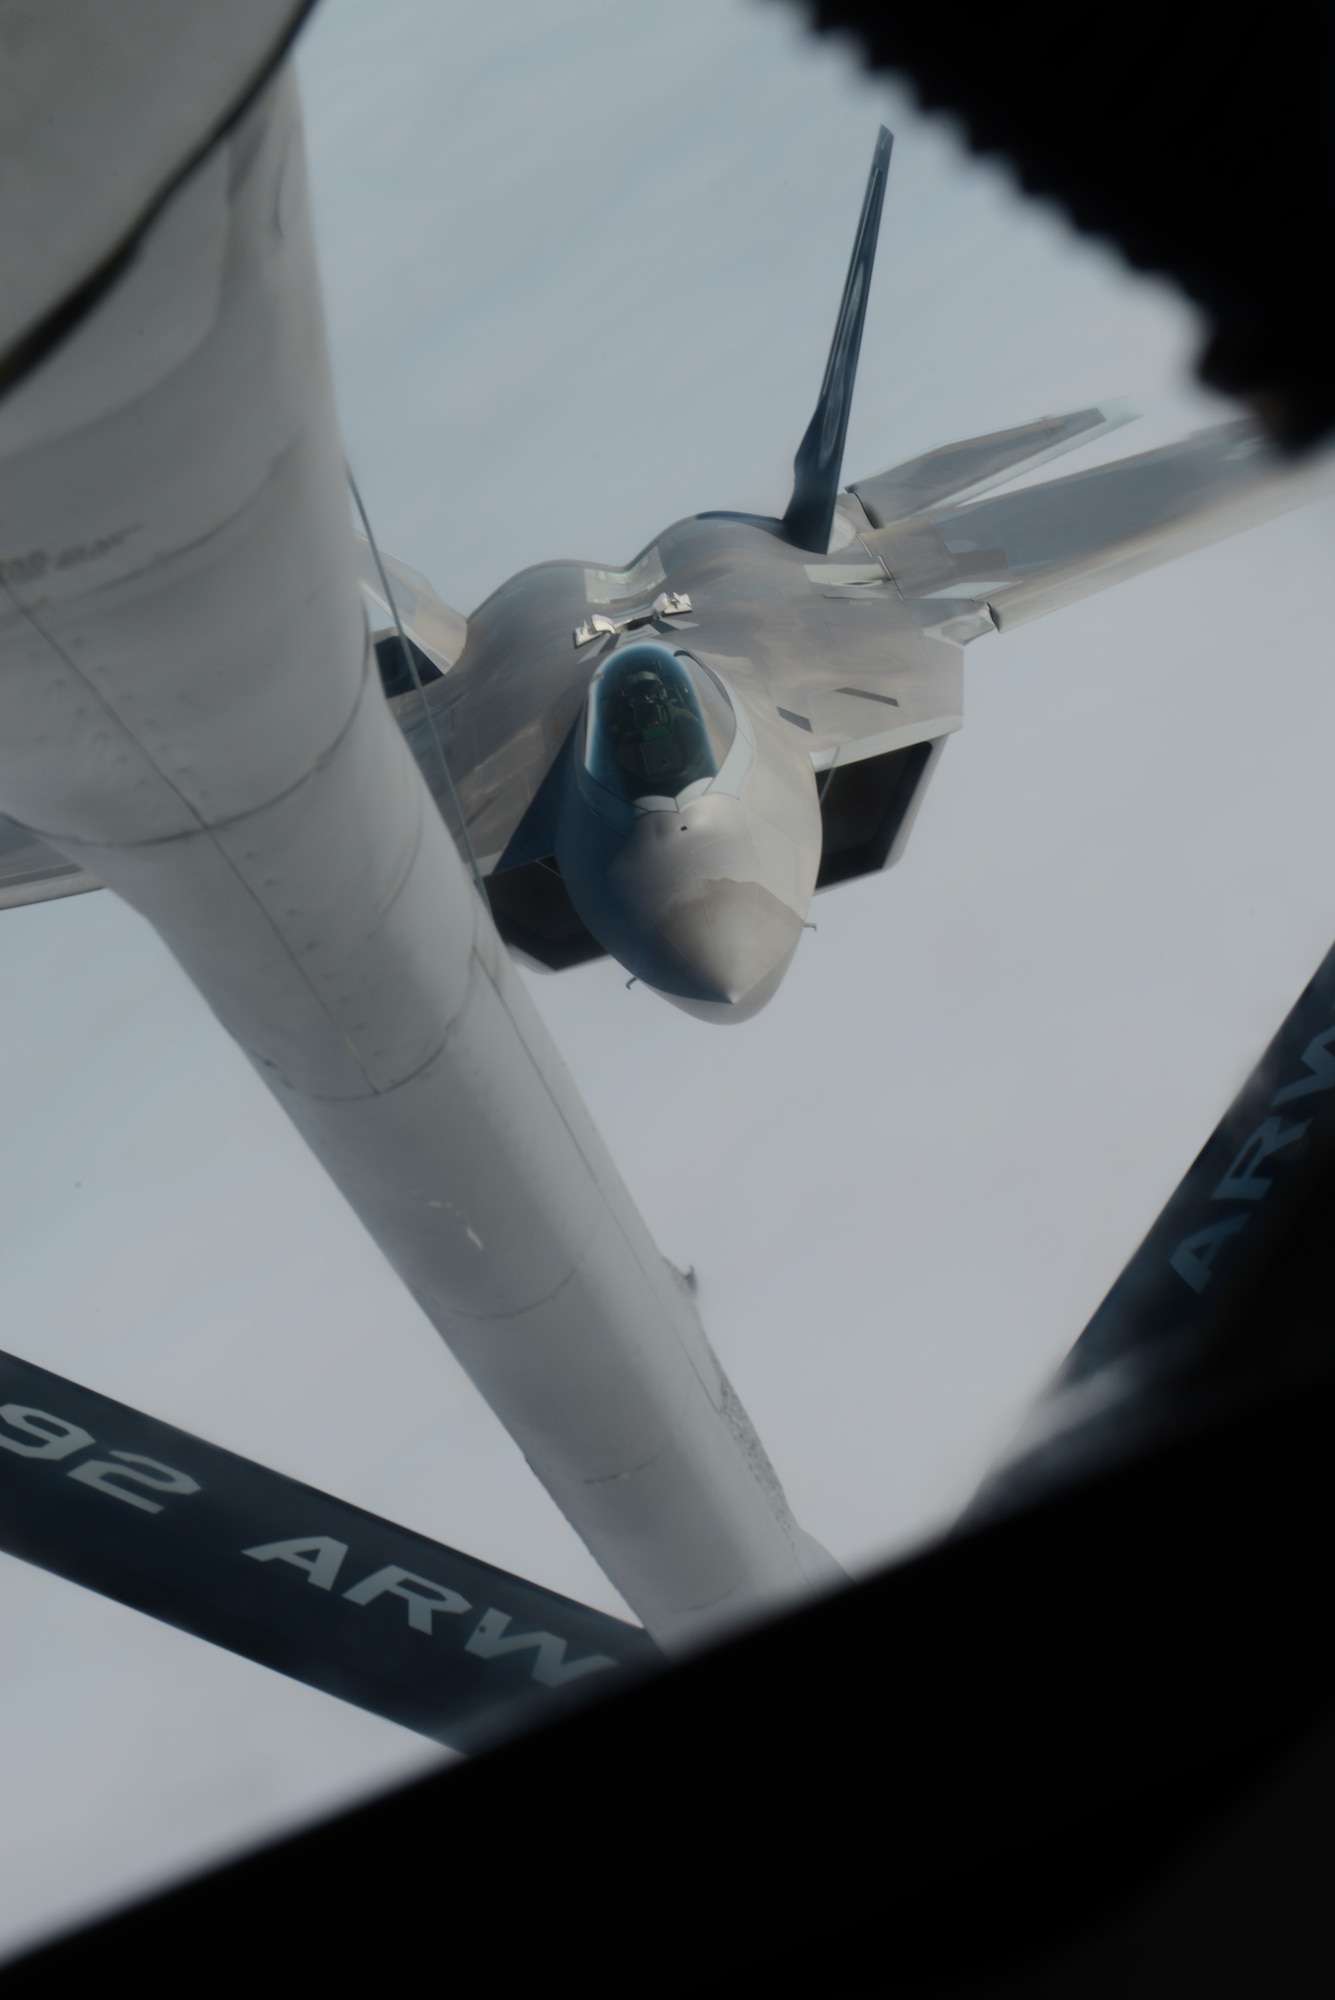 An F-22 Raptor from the 1st Fighter Wing, Joint Base Langley-Eustis, Va., prepares to refuel from a KC-135 Stratotanker from the 93rd Air Refueling Squadron Fairchild Air Force Base, Wash., over the Nevada Test and Training Range during Red Flag 14-1 at Nellis AFB, Nev., Feb. 6, 2014. Red Flag gives Airmen an opportunity to experience realistic, stressful combat situations in a controlled environment to increase their ability to complete missions and safely return home. (U.S. Air Force photo by Senior Airman Benjamin Sutton/Released)